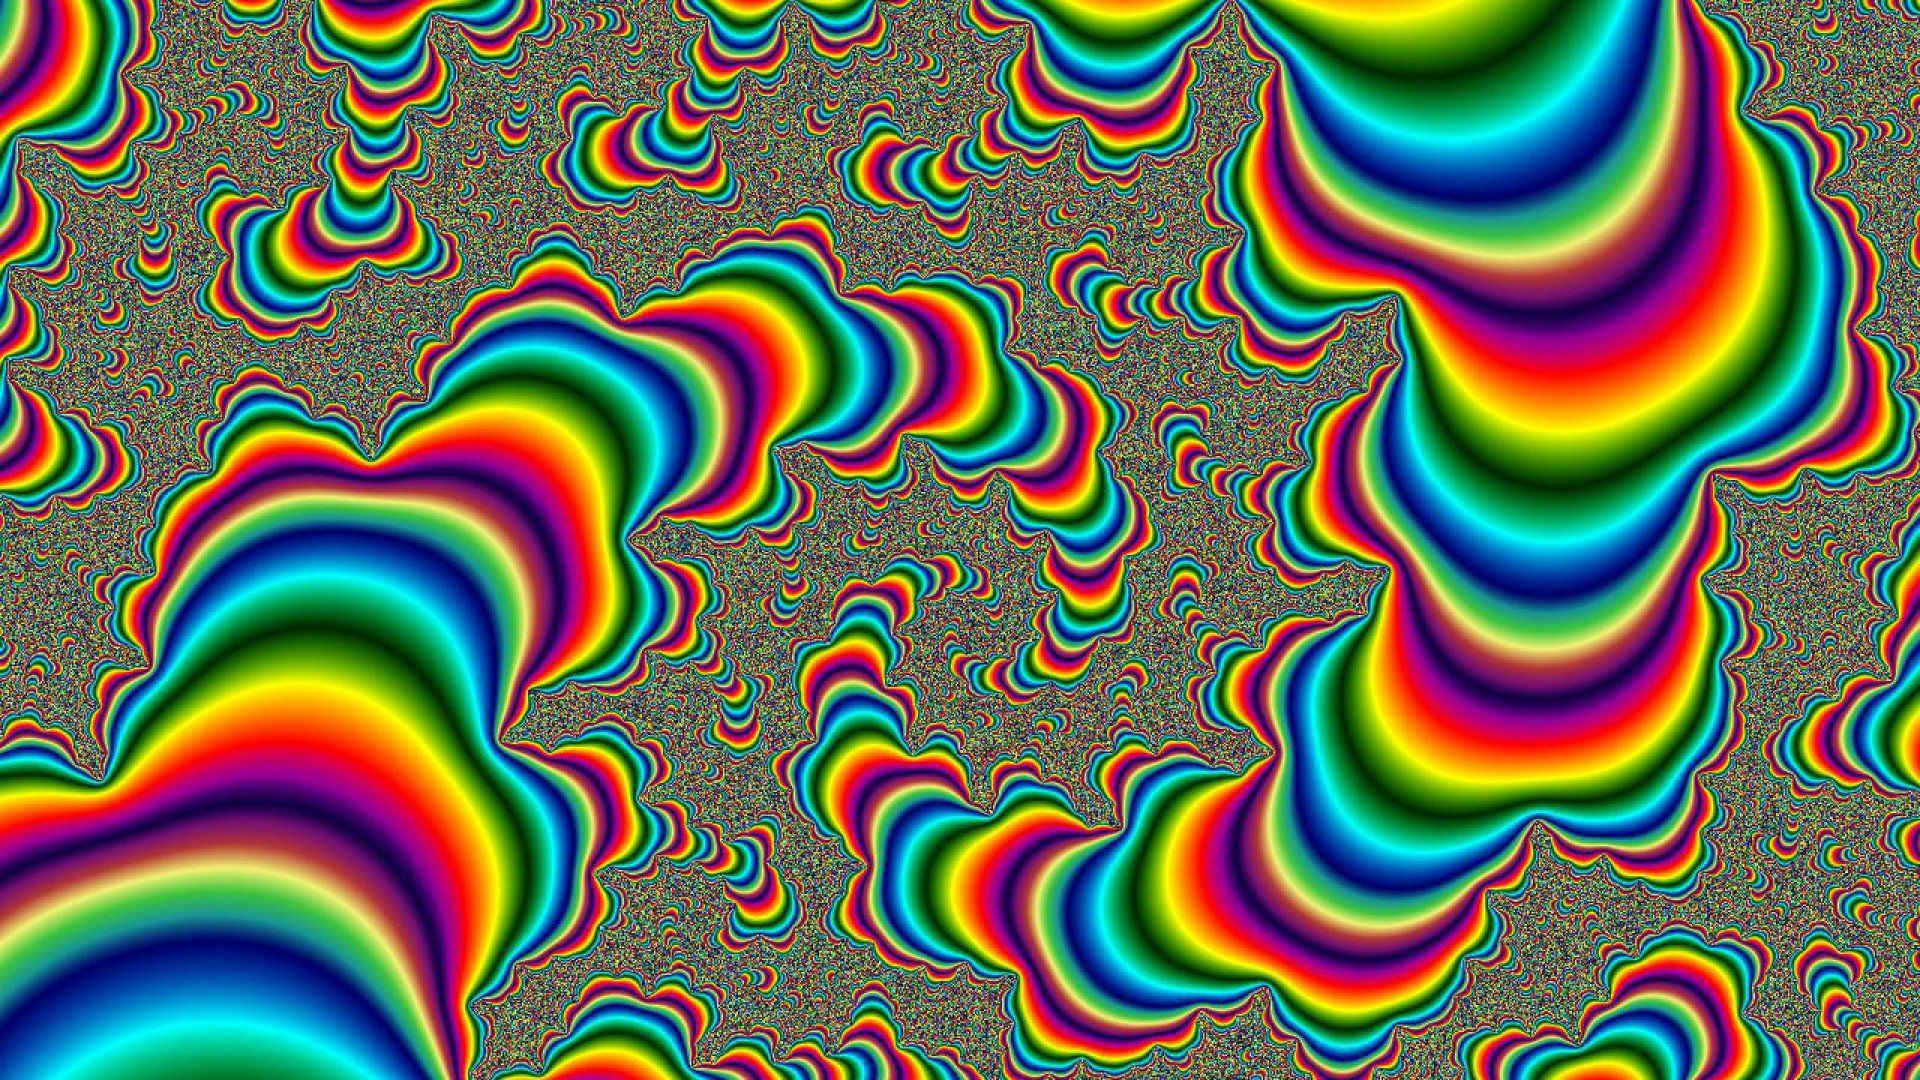 1920x1080 Trippy Hd Wallpapers for Mac Amazing Moving Wallpaper Psychedelic Wallpapers  Art Digital 4k